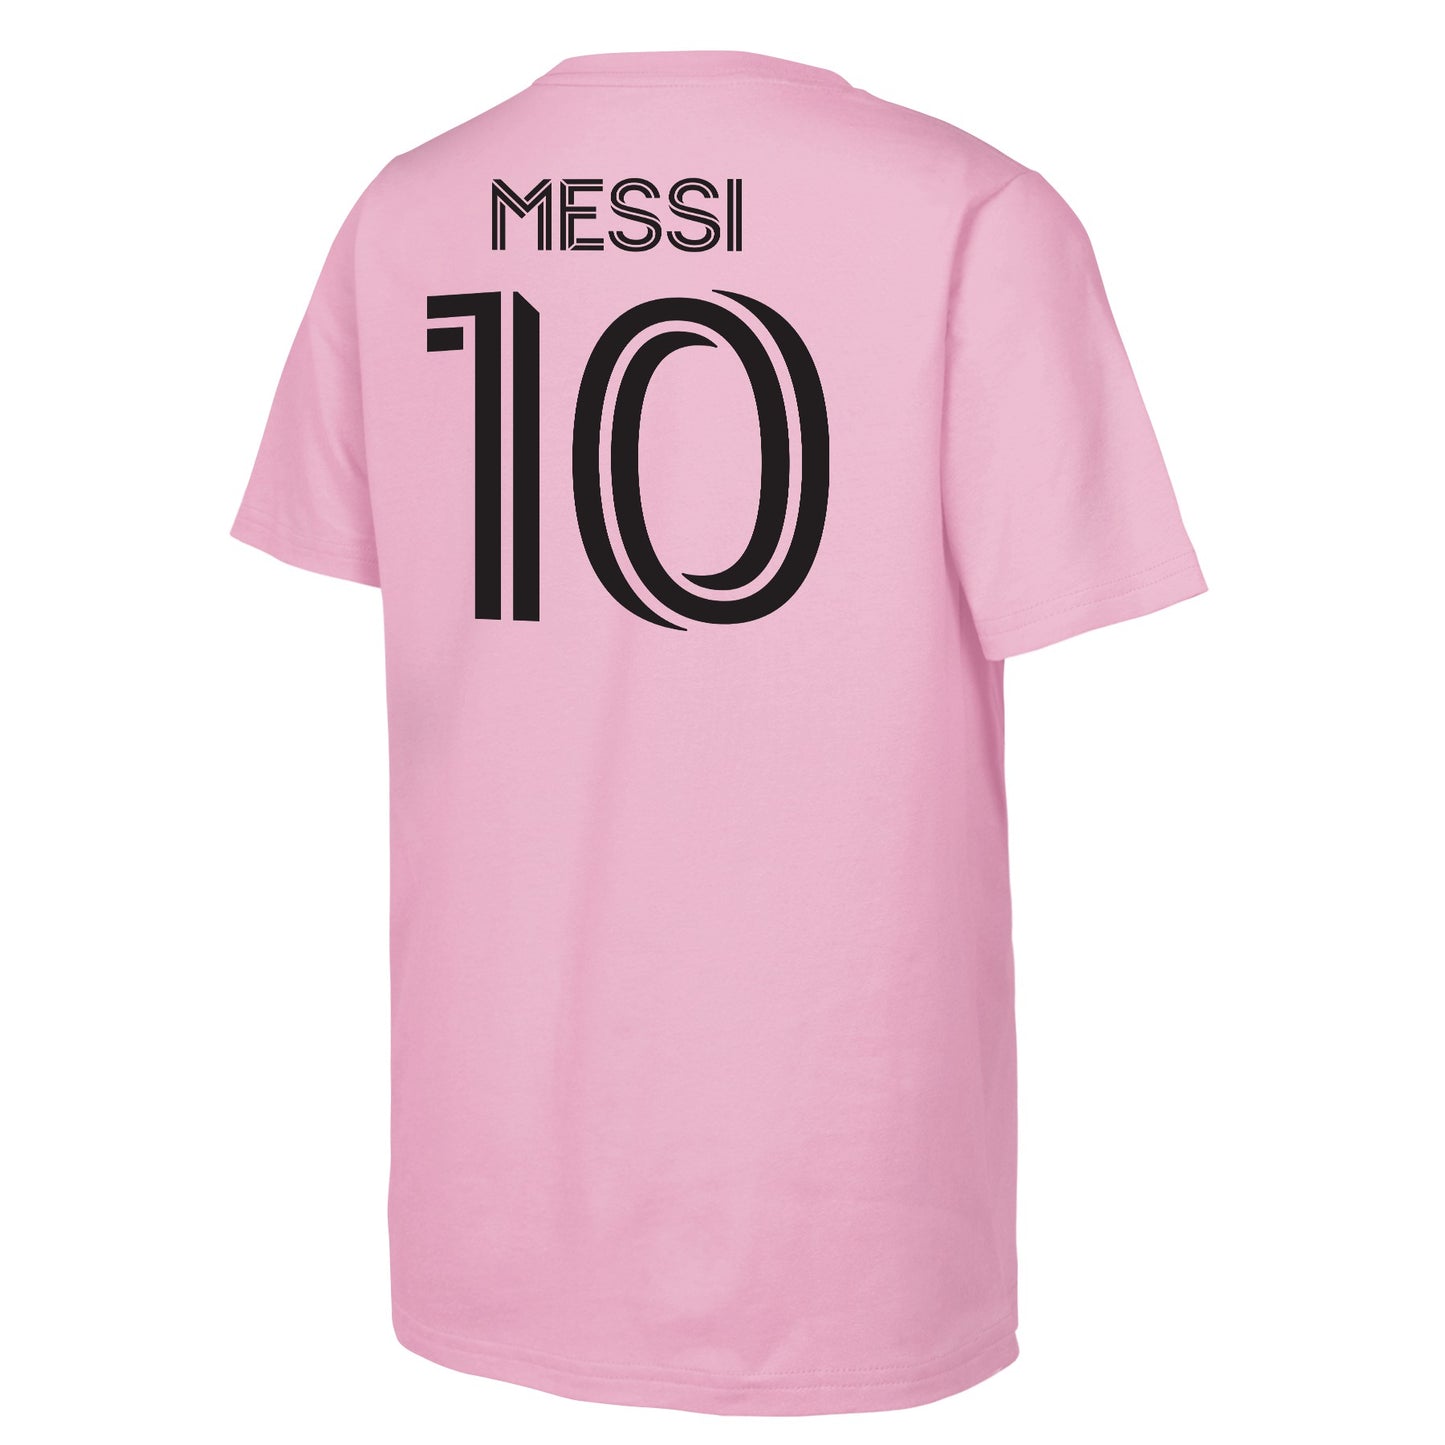 Youth Lionel Messi Inter Miami Pink Name & Number T-Shirt